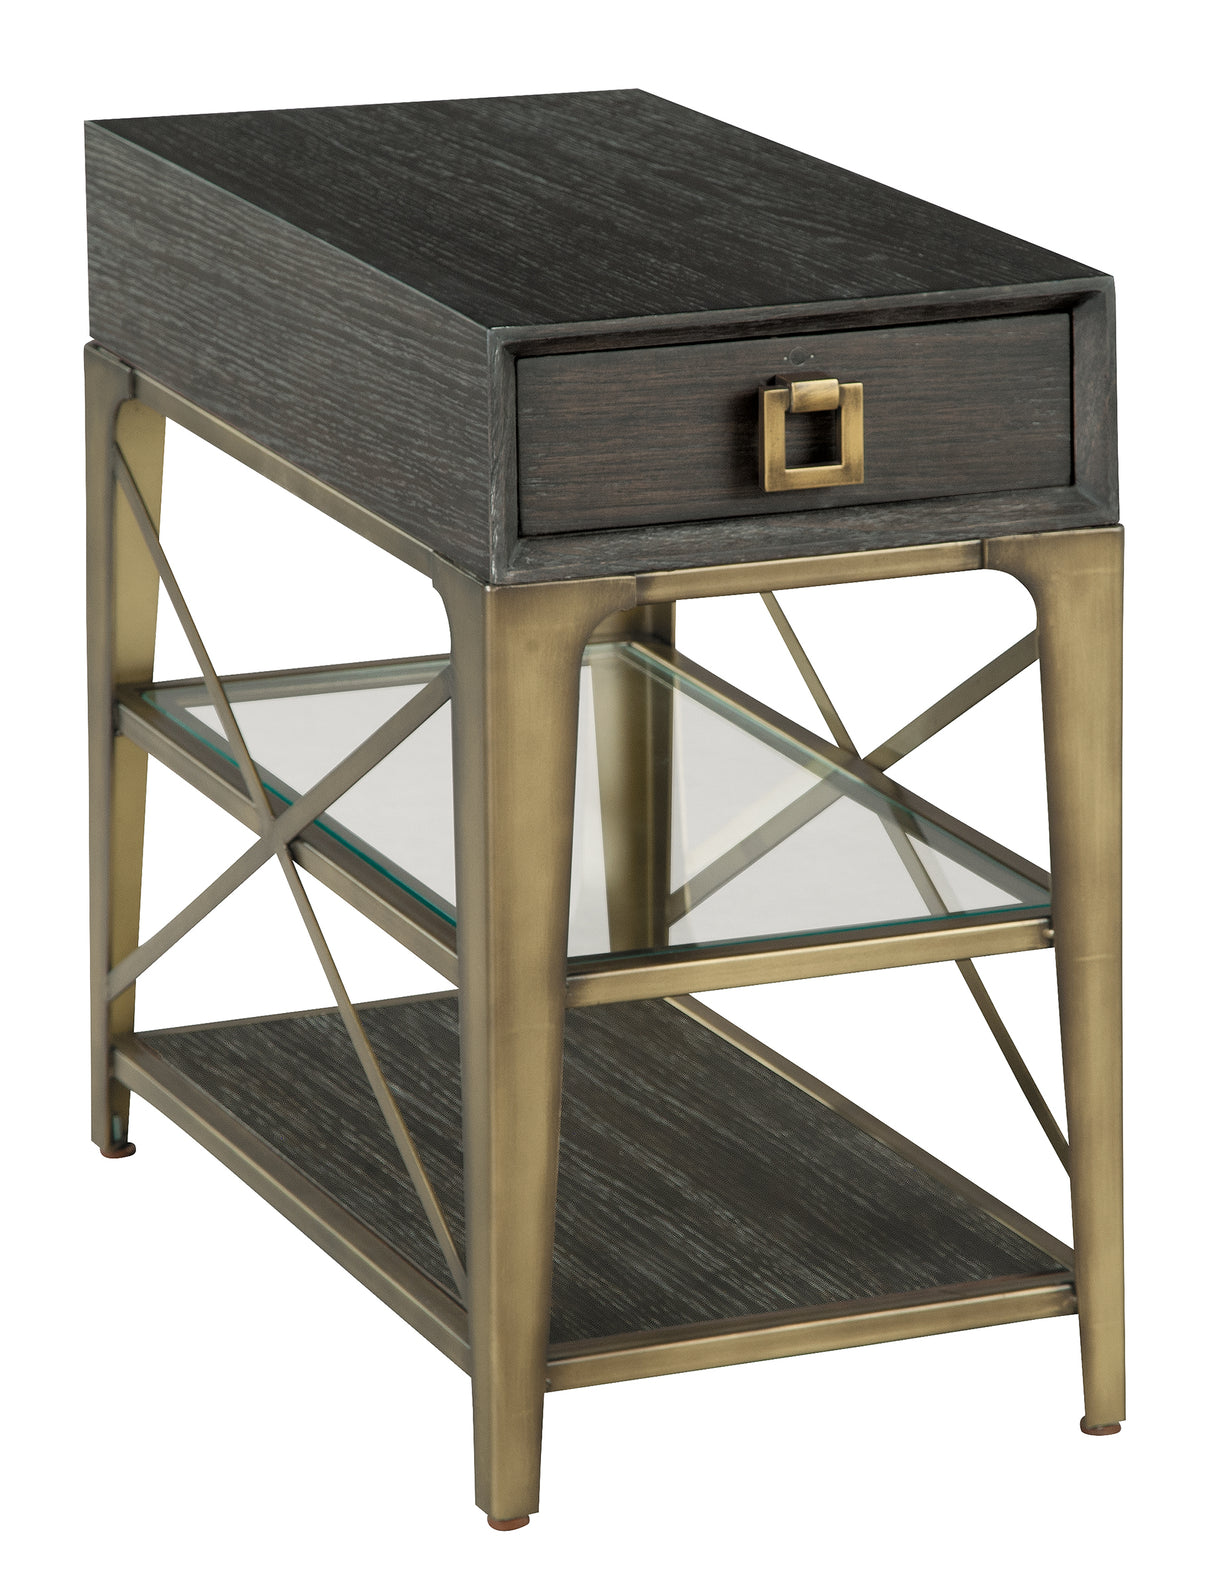 Hekman 23807 Edgewater 14in. x 25in. x 25.5in. End Table